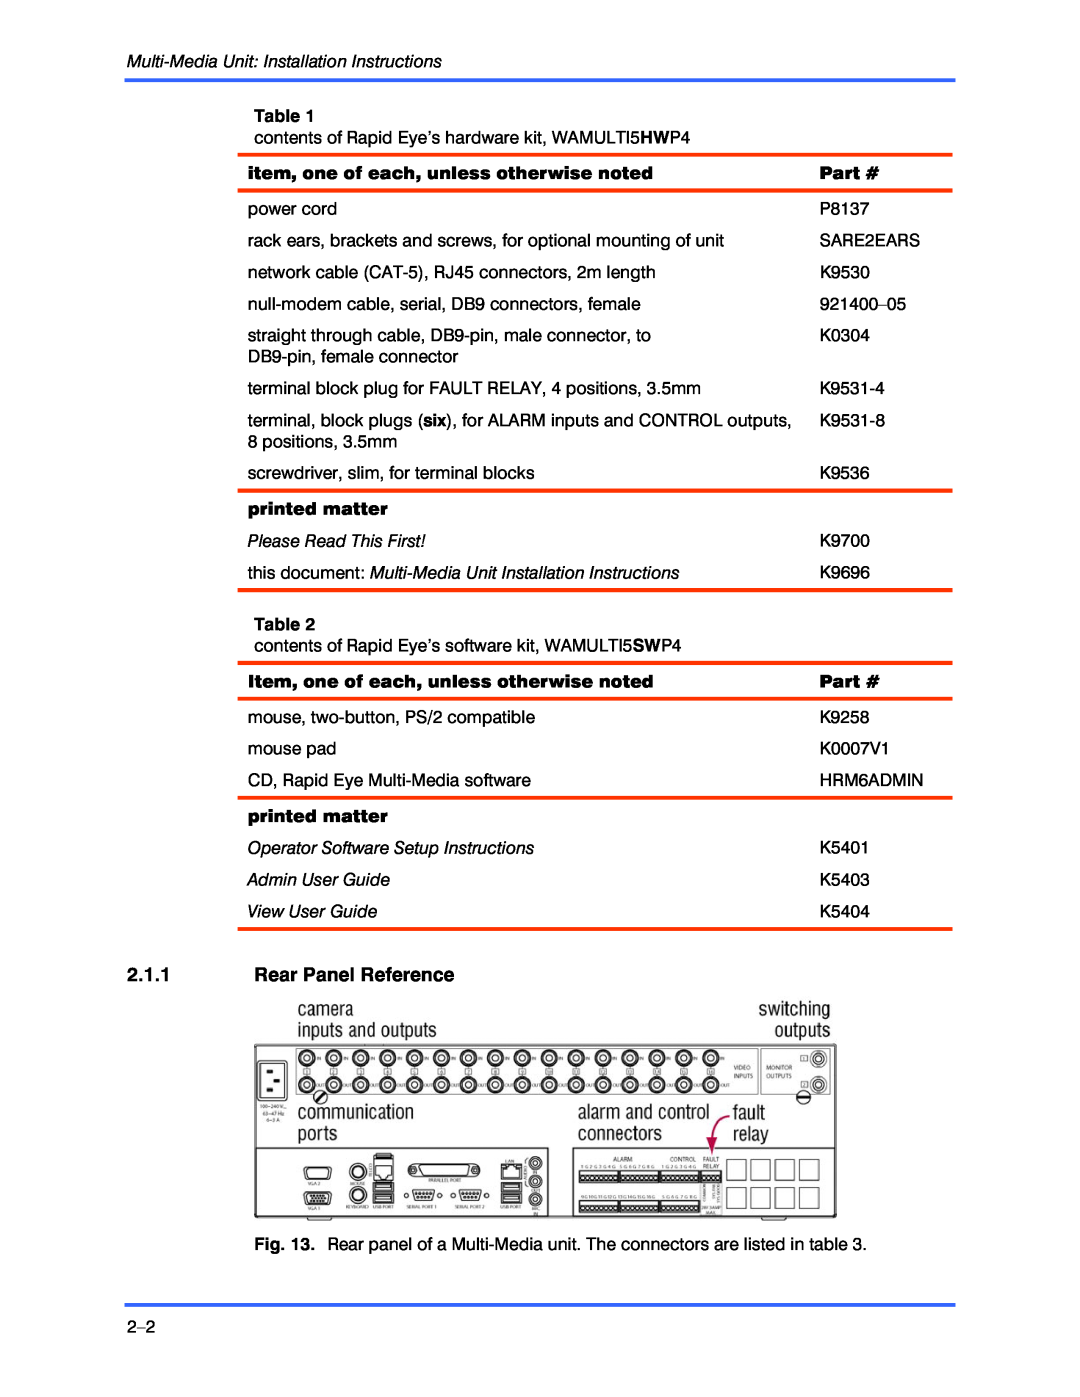 Honeywell K9696V2 2.1.1Rear Panel Reference, Table, item, one of each, unless otherwise noted, Part #, printed matter 